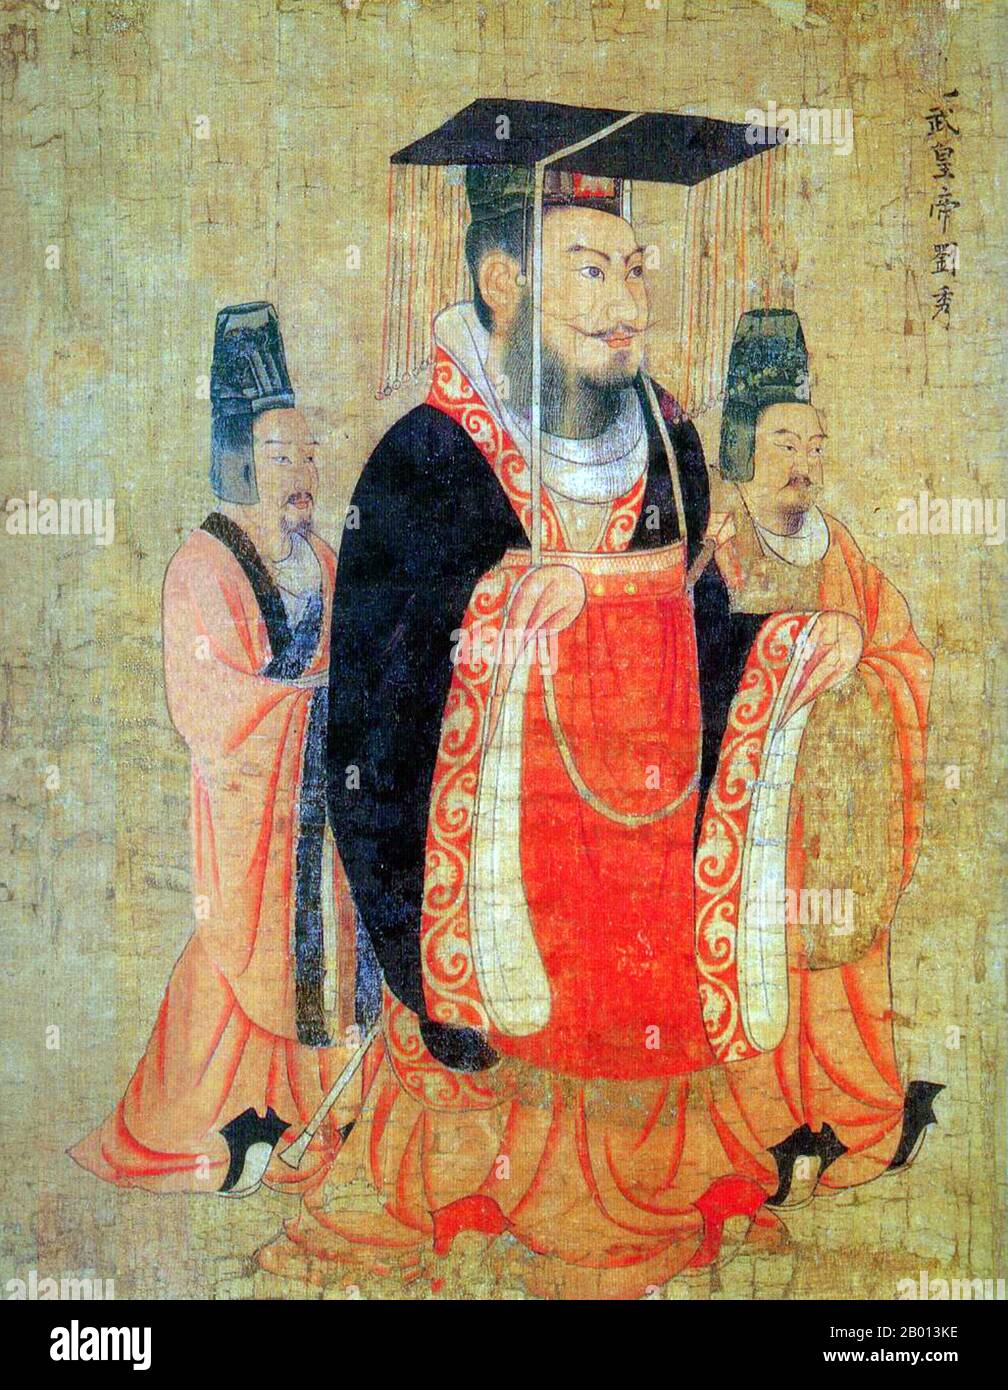 China: Emperor Guangwu of Han (13 January 5 BCE – 29 March 57 CE). Handscroll painting from the 'Thirteen Emperors Scroll' by Tang Dynasty court painter Yan Liben (600-673), 7th century.  Emperor Guangwu, born Liu Xiu, was an emperor of the Chinese Han Dynasty, restorer of the dynasty in 25 CE and thus founder of the Later Han or Eastern Han (the restored Han Dynasty). He ruled over parts of China at first, and through suppression and conquest of regional warlords, the whole of China was consolidated by the time of his death in 57 CE. Stock Photo